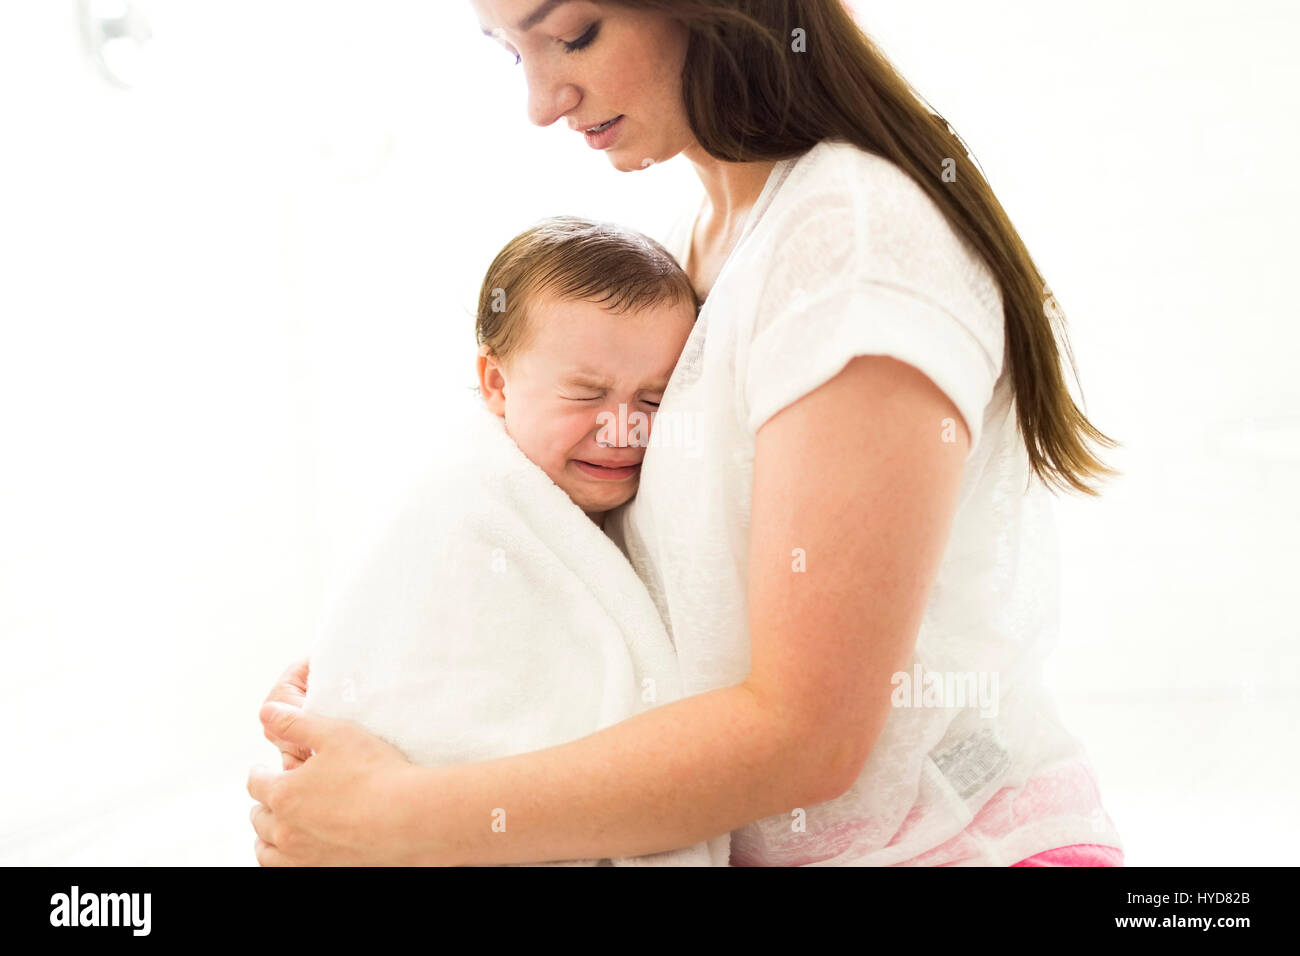 Mother embracing and consoling son (4-5) Stock Photo